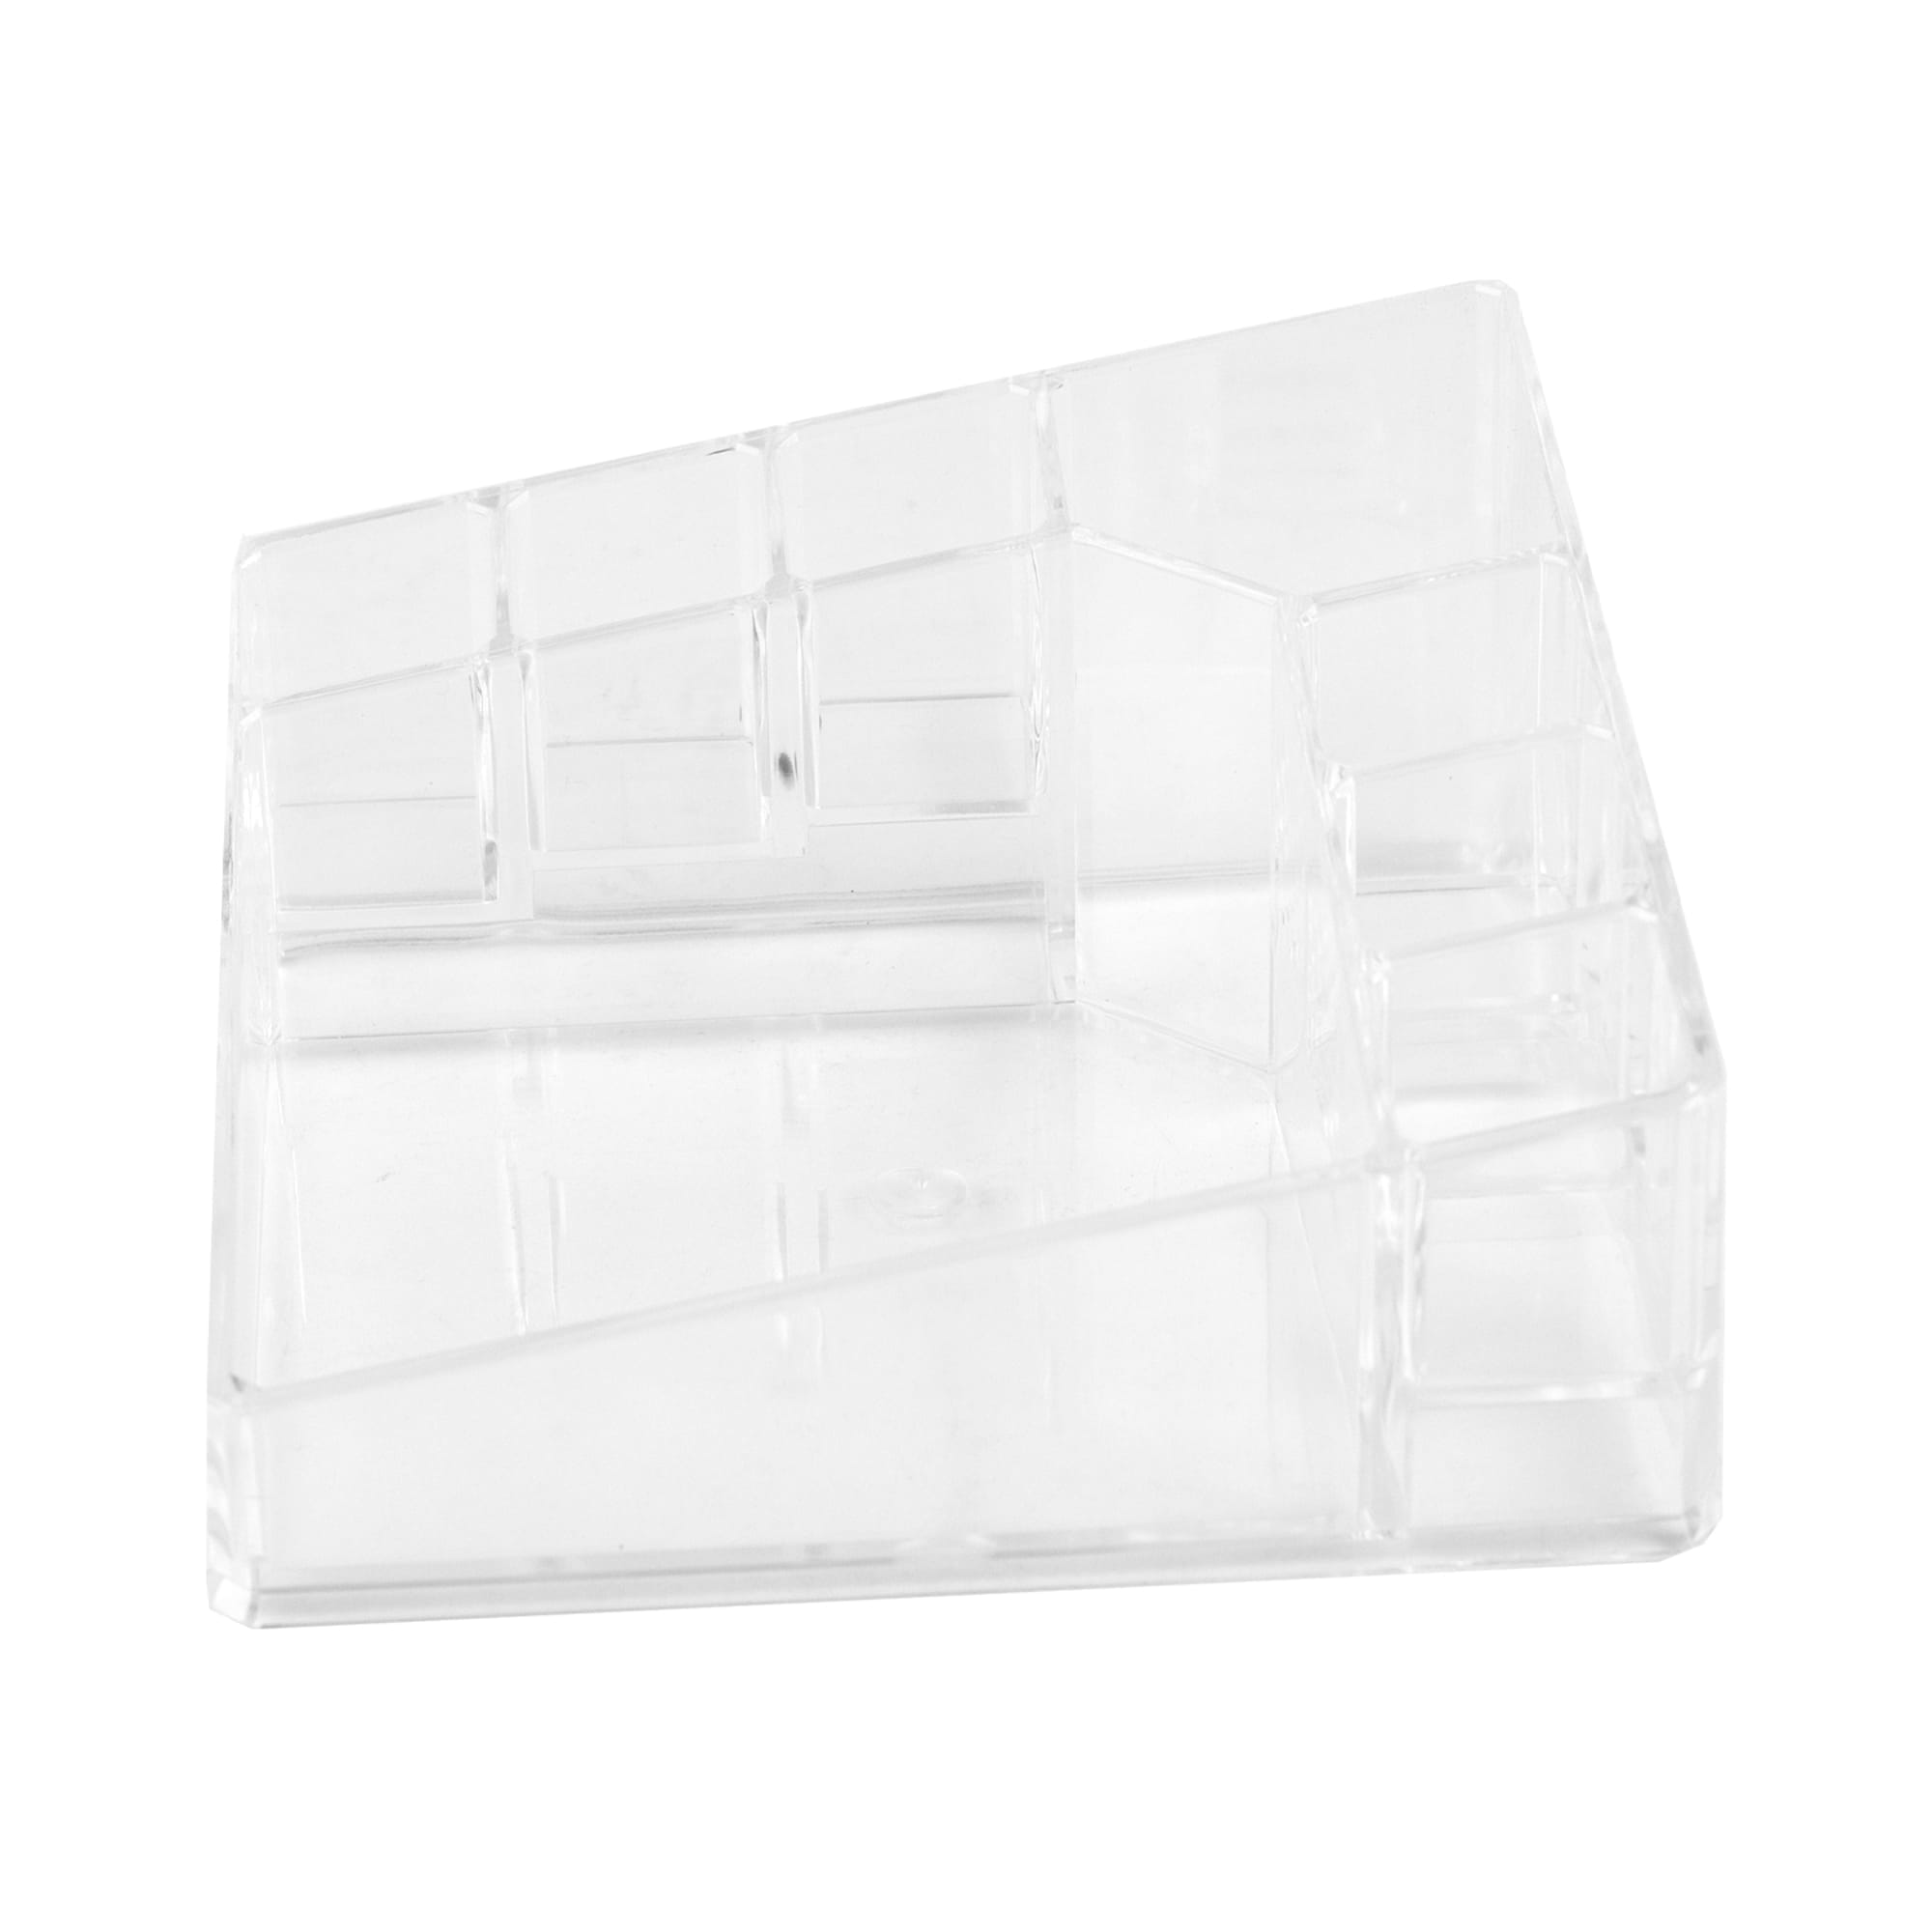 Home Basics Small Square Shatter-Resistant Plastic 8 Compartment Cosmetic Organizer, Clear $3.00 EACH, CASE PACK OF 12